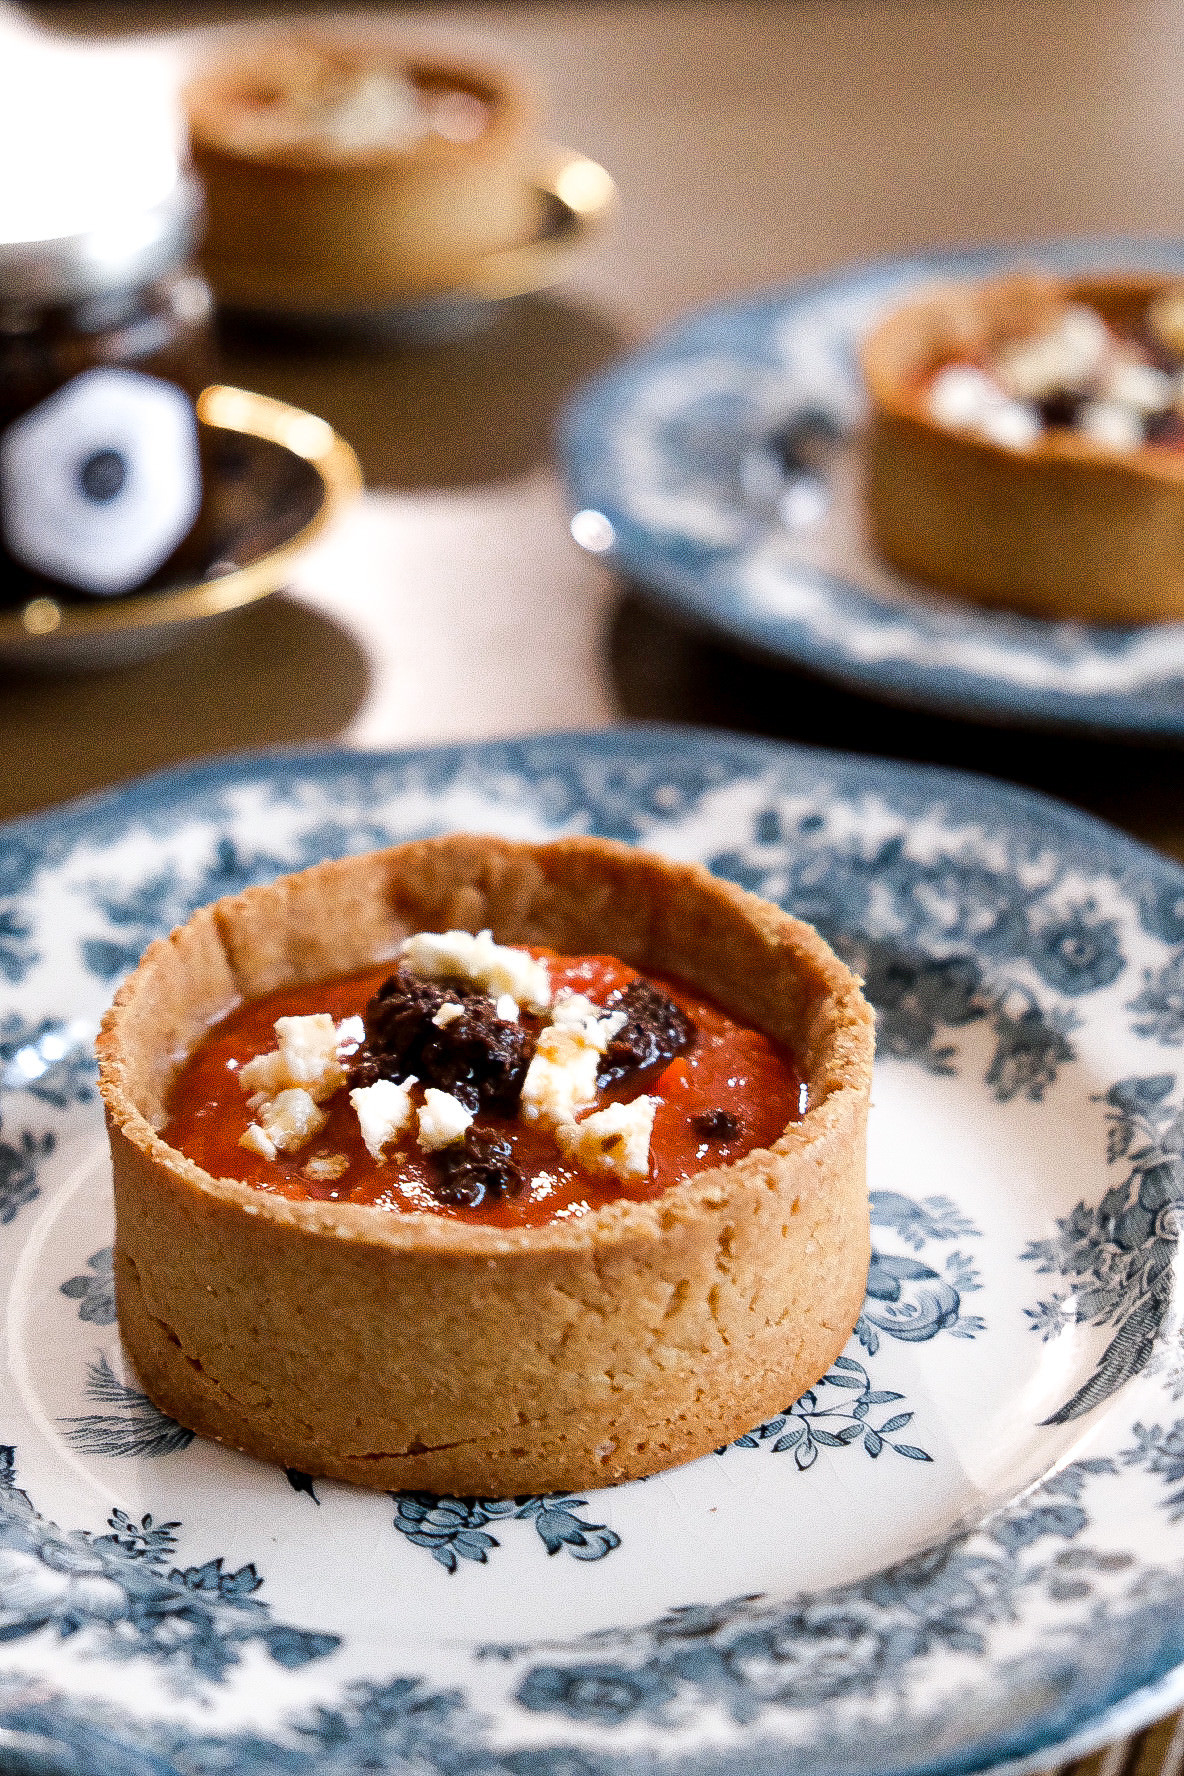  Mediterranean tarts with black olives and sun-dried tomatoes